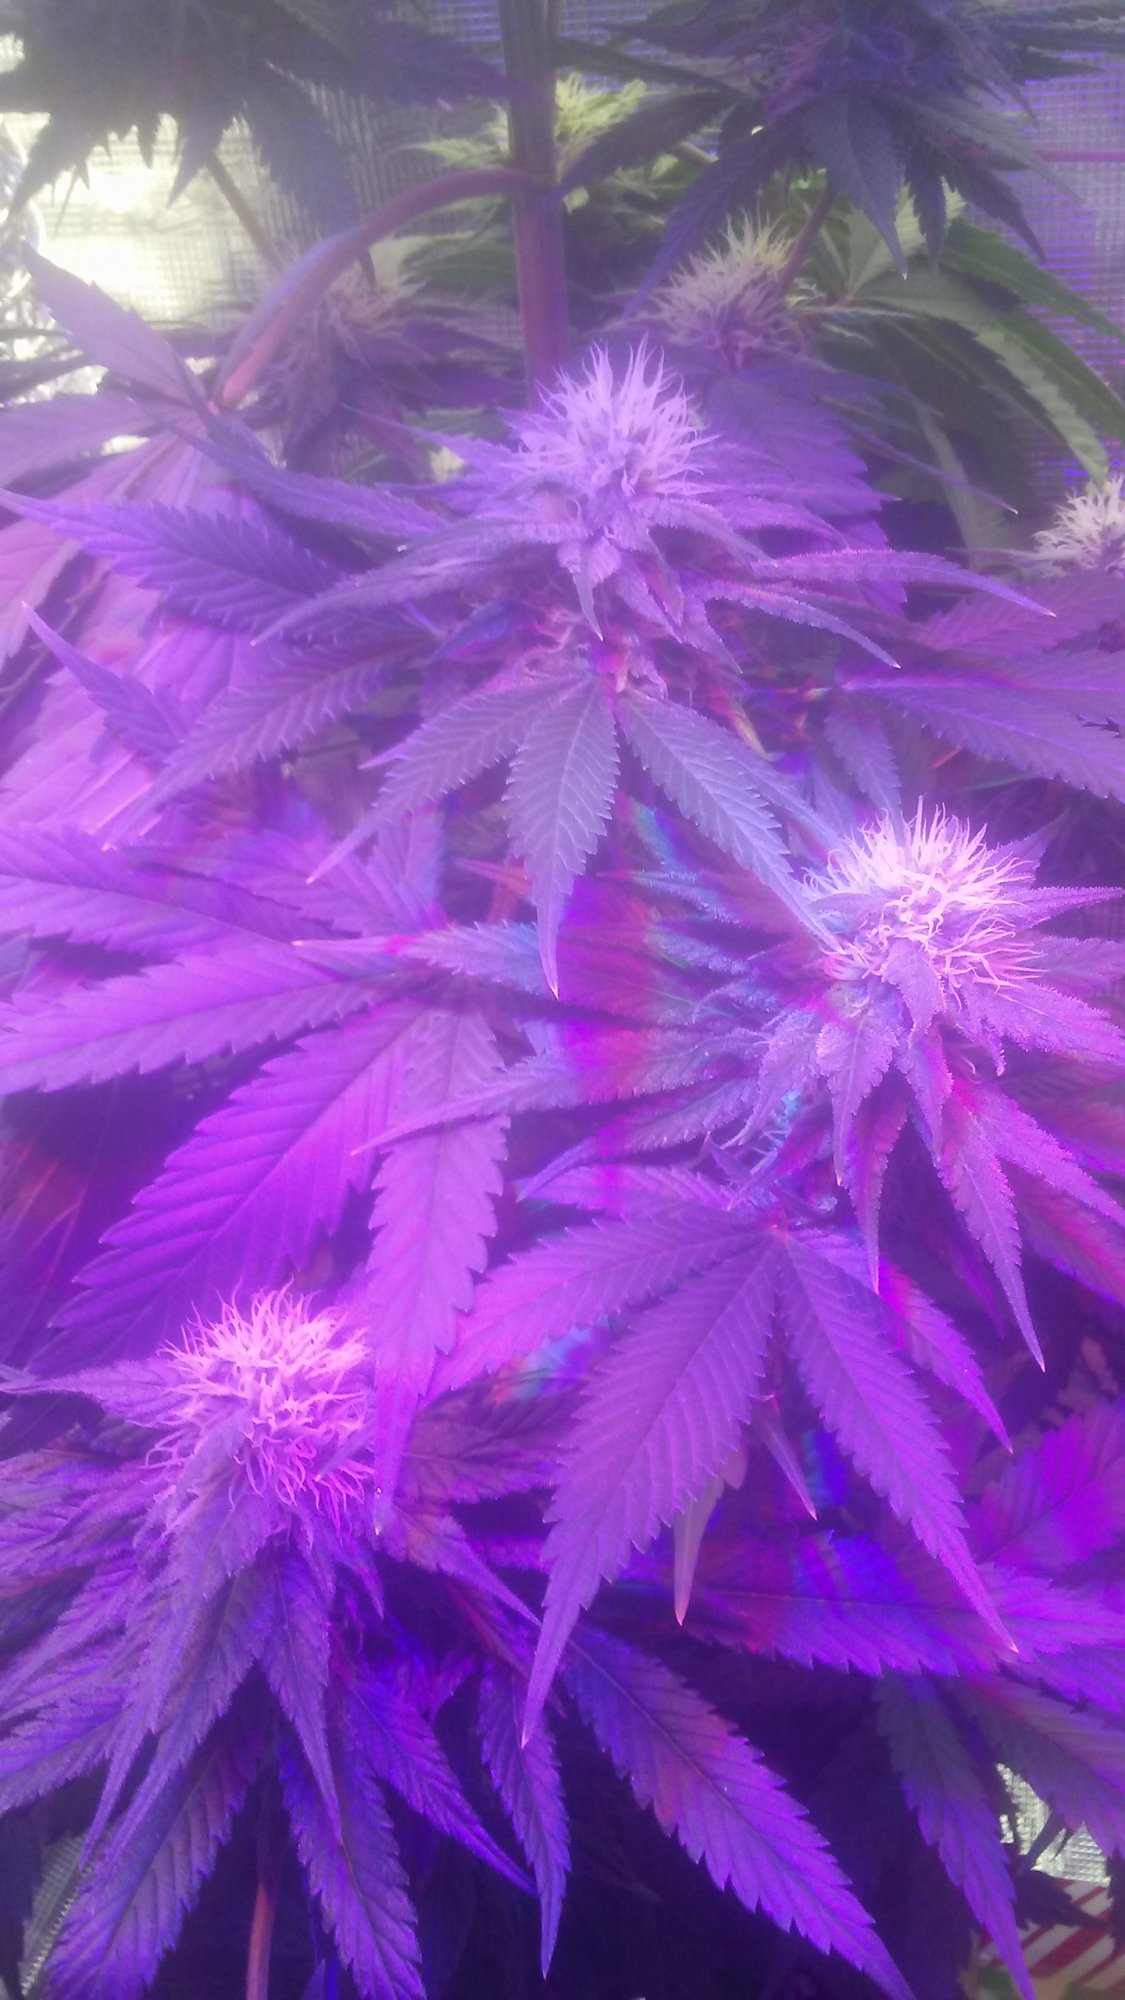 How much longer for this bagseed 3